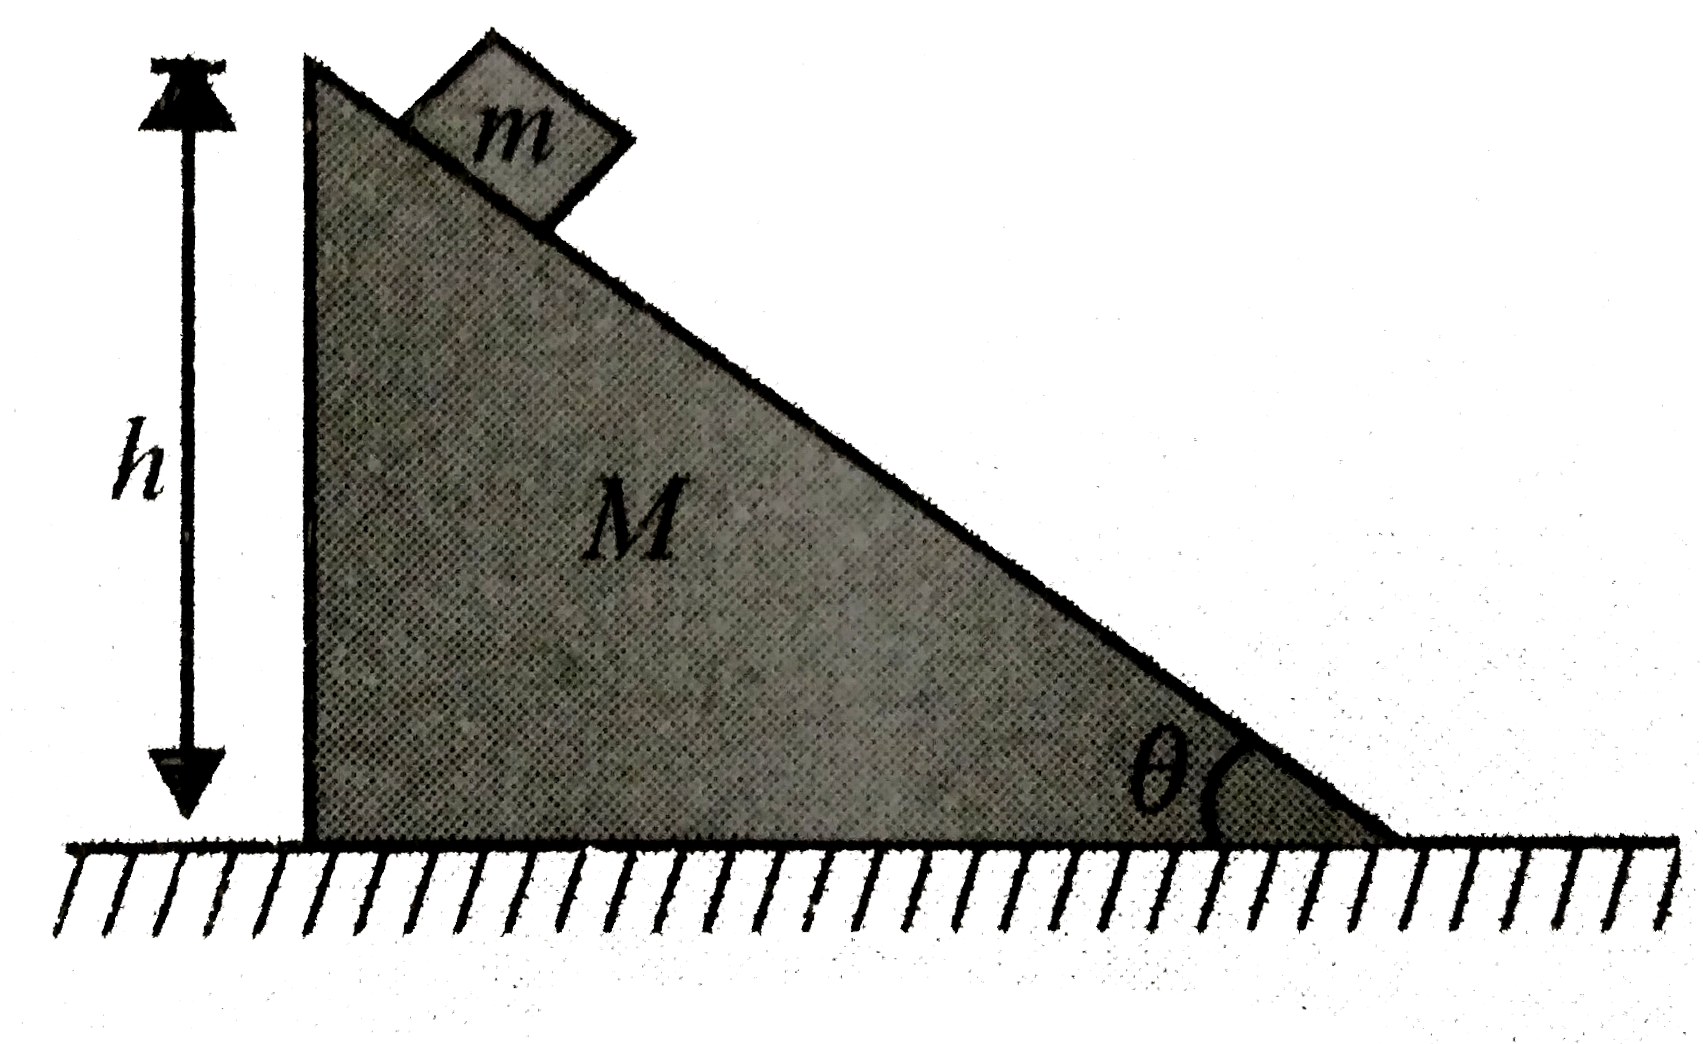 A block of mass m is initially lying on a wedge of mass M with an angle of inclination theta as shown in figure. Calculate the displacement of the wedge when the block is released and reaches to the bottom of the wedge.